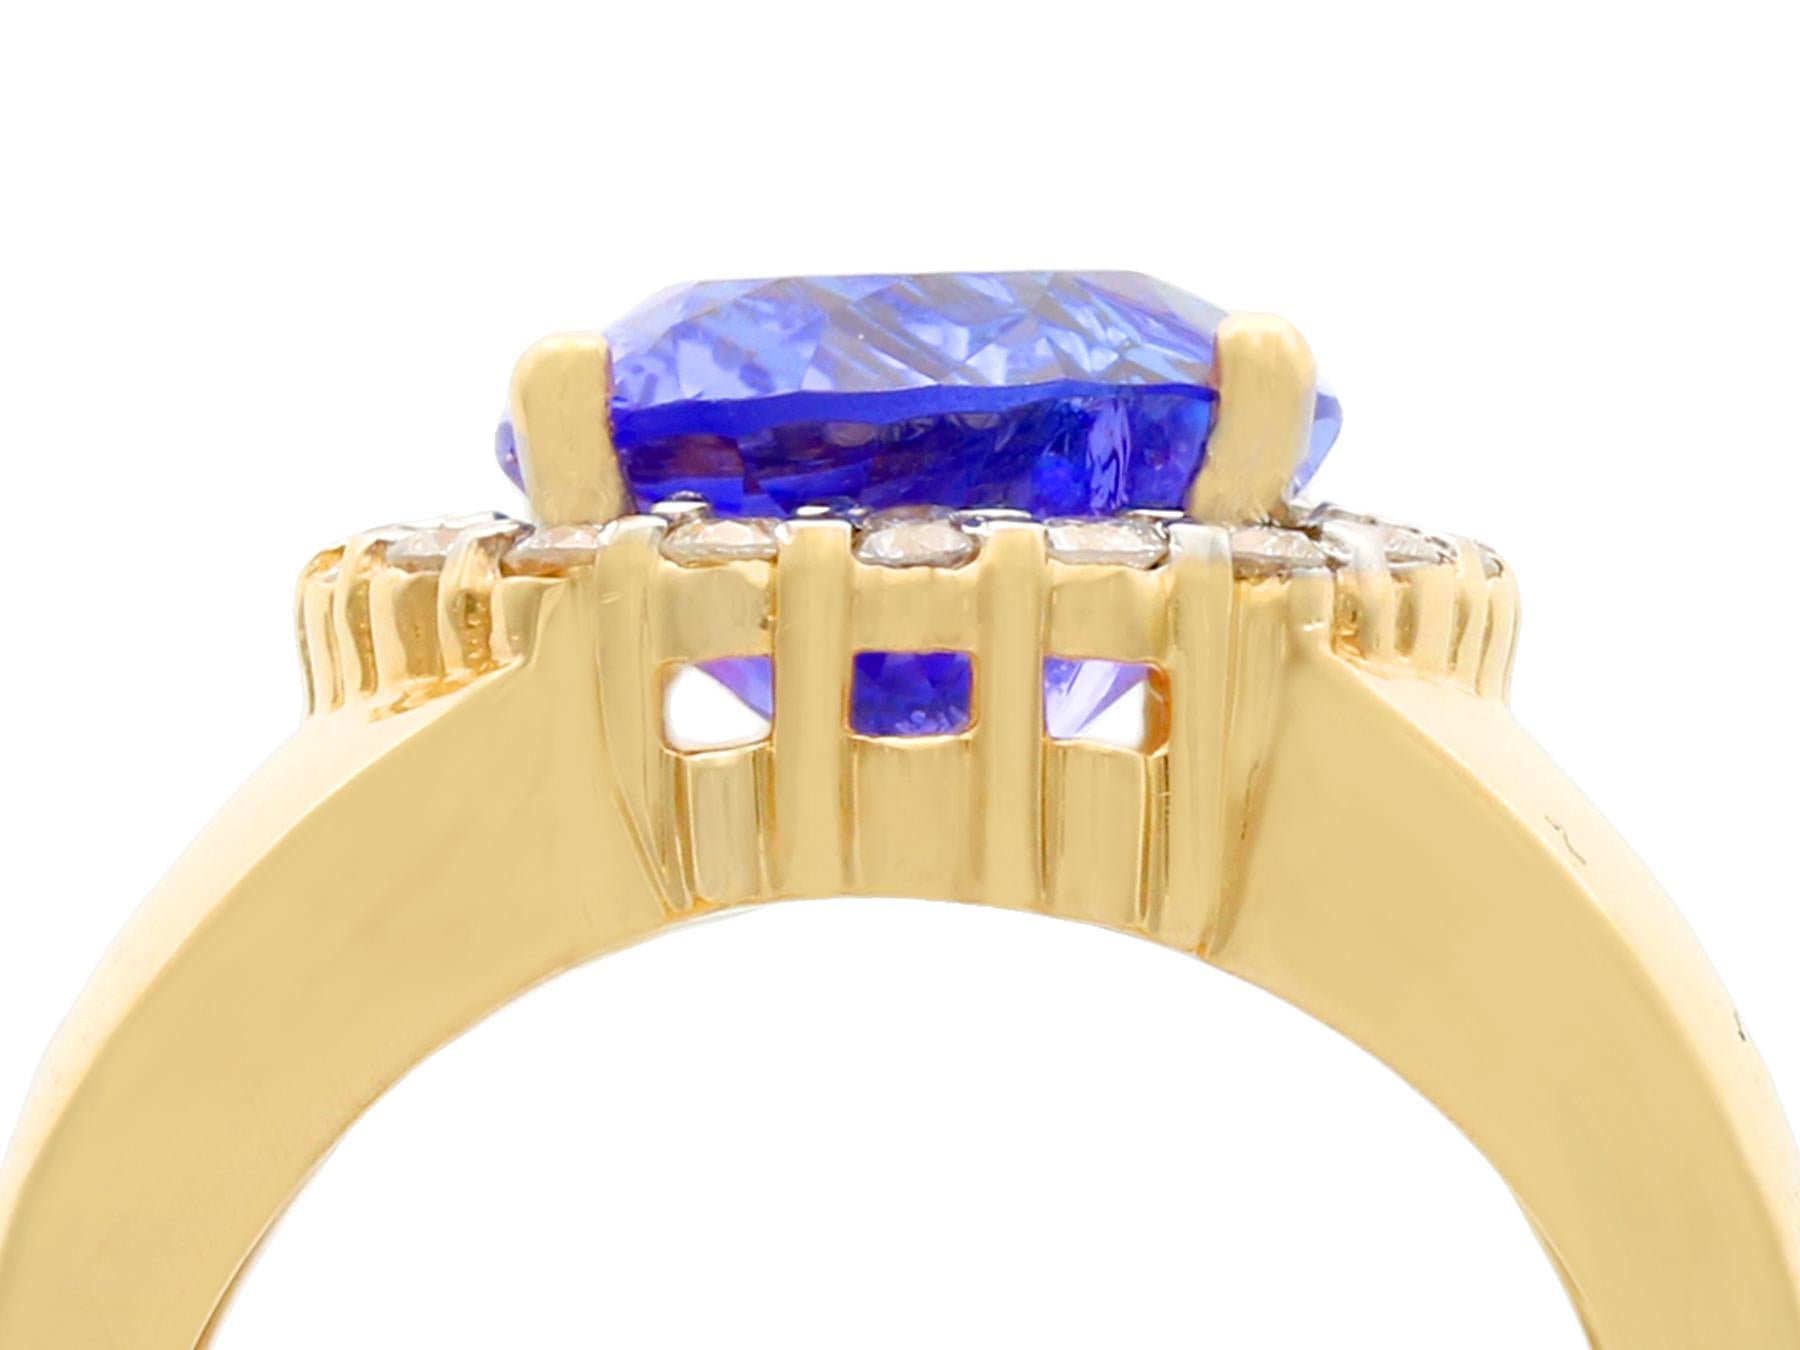 A stunning, fine and impressive vintage 1980s 5.72 carat tanzanite and 0.59 carat diamond, 14 karat yellow gold dress ring; part of our diverse vintage jewelry and estate jewelry collections.

This stunning, fine and impressive vintage ring with